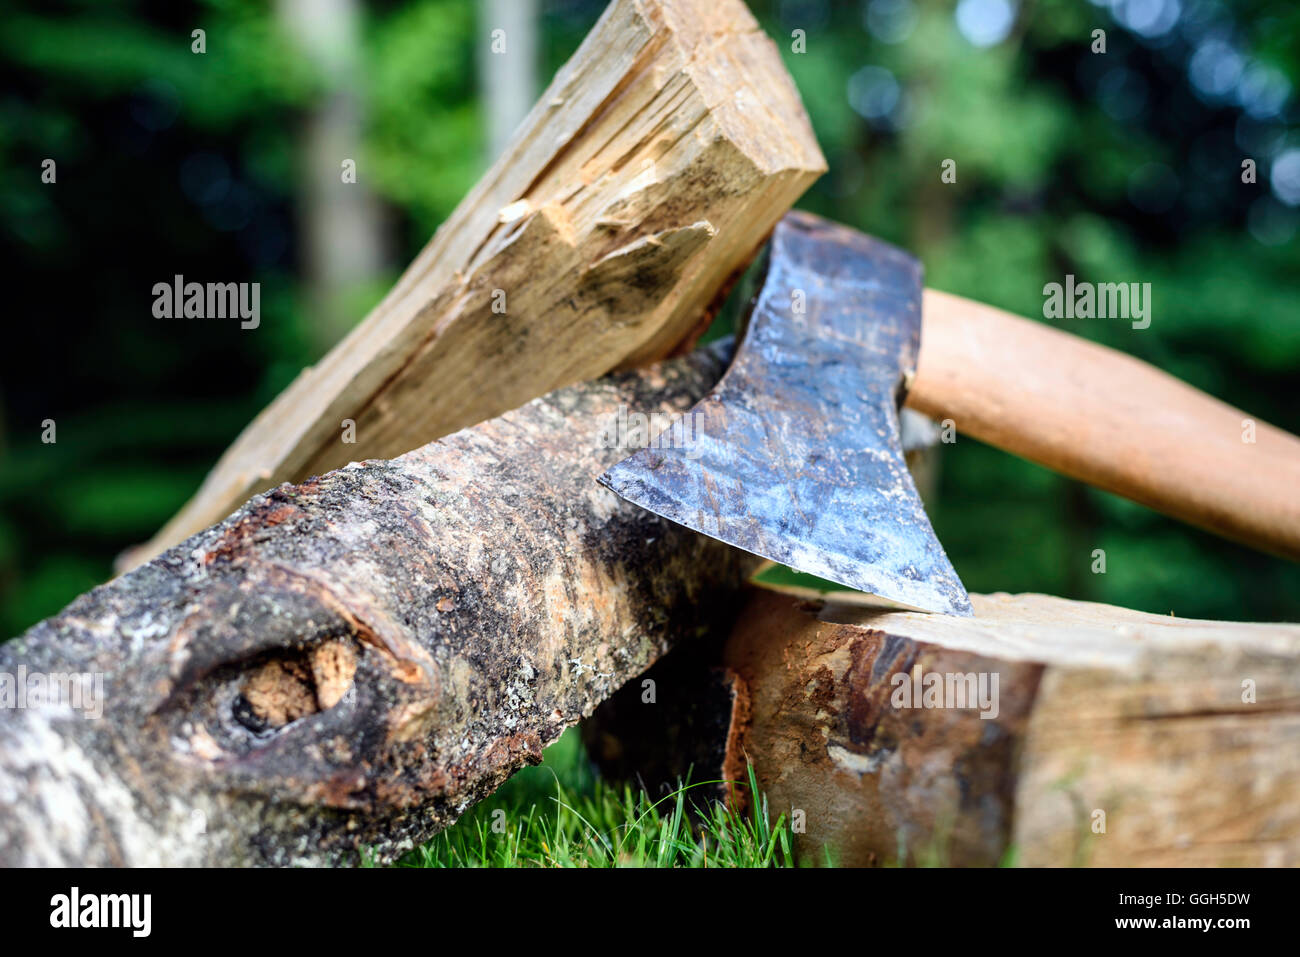 Old rusty axe and firewood logs on the grass Stock Photo